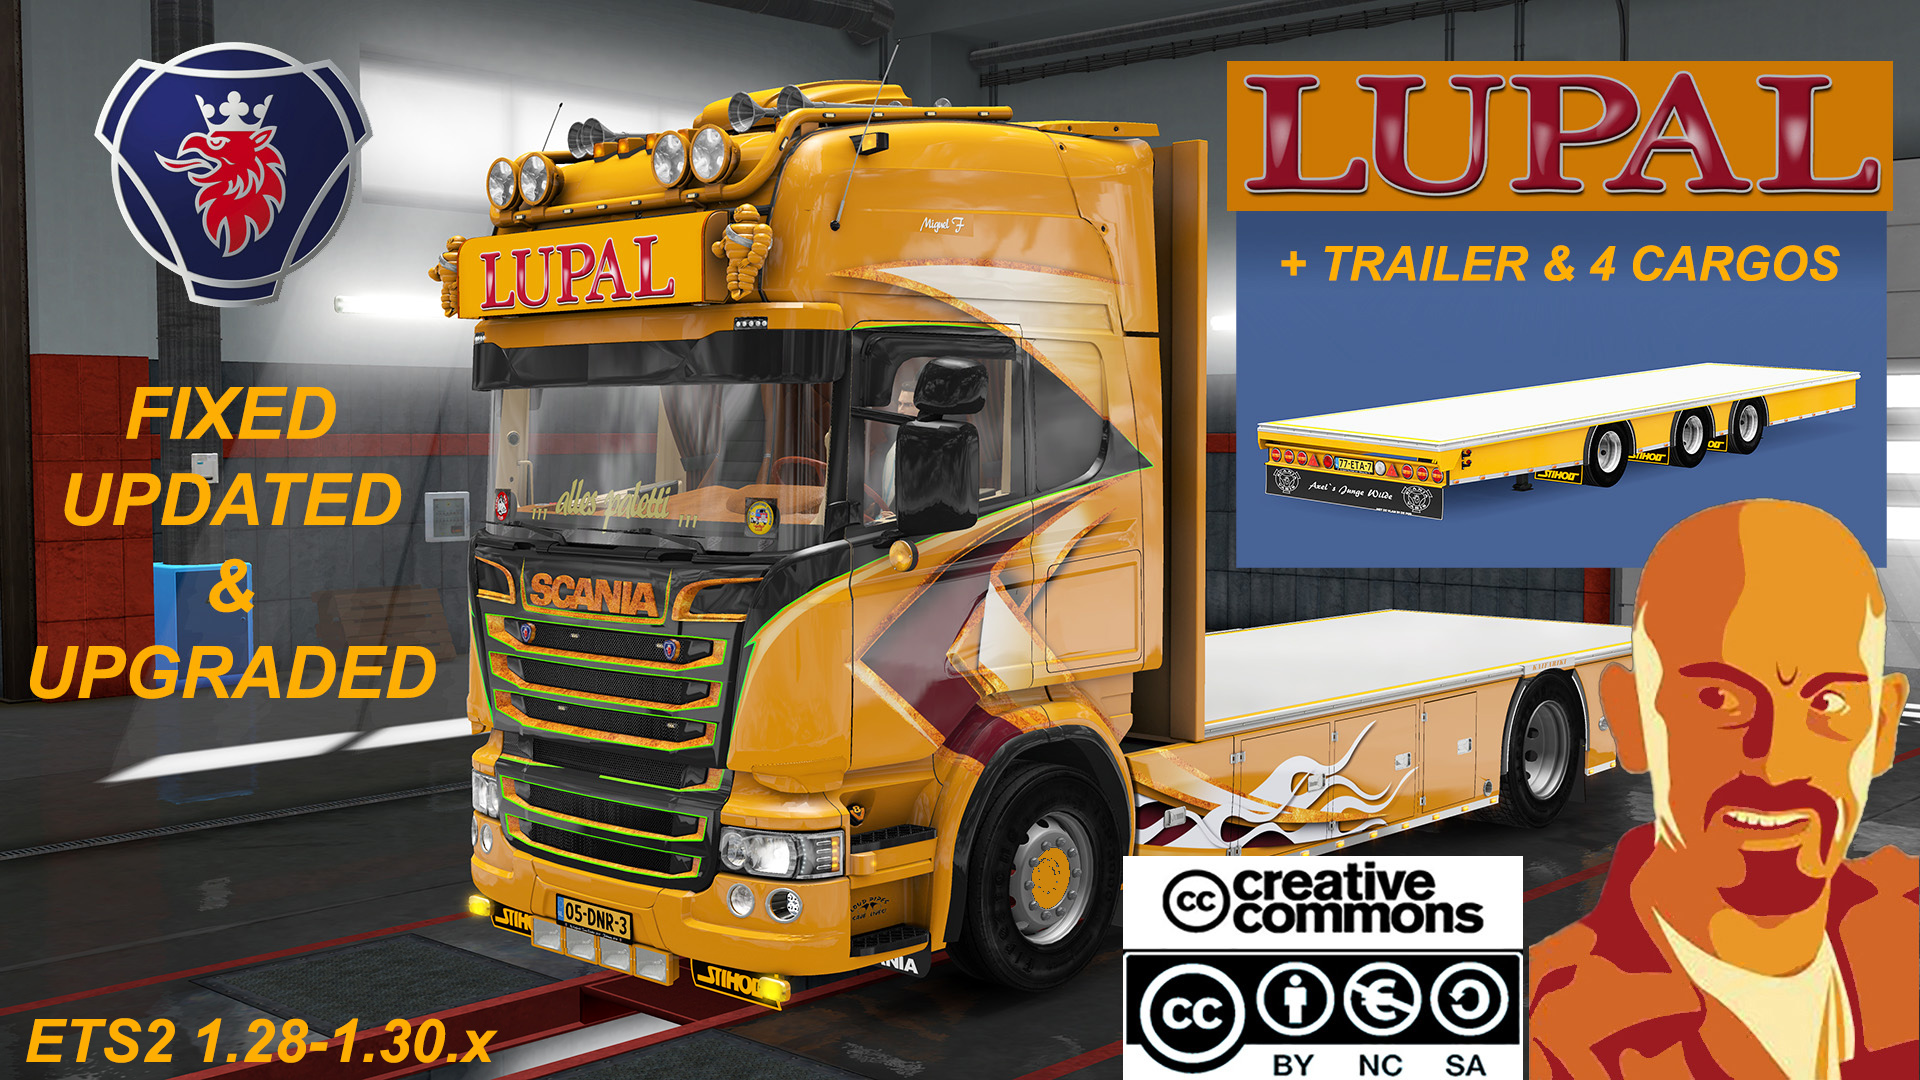 SCANIA LUPAL (RECOVERED) 1.30.x ETS2 mods Euro truck simulator 2